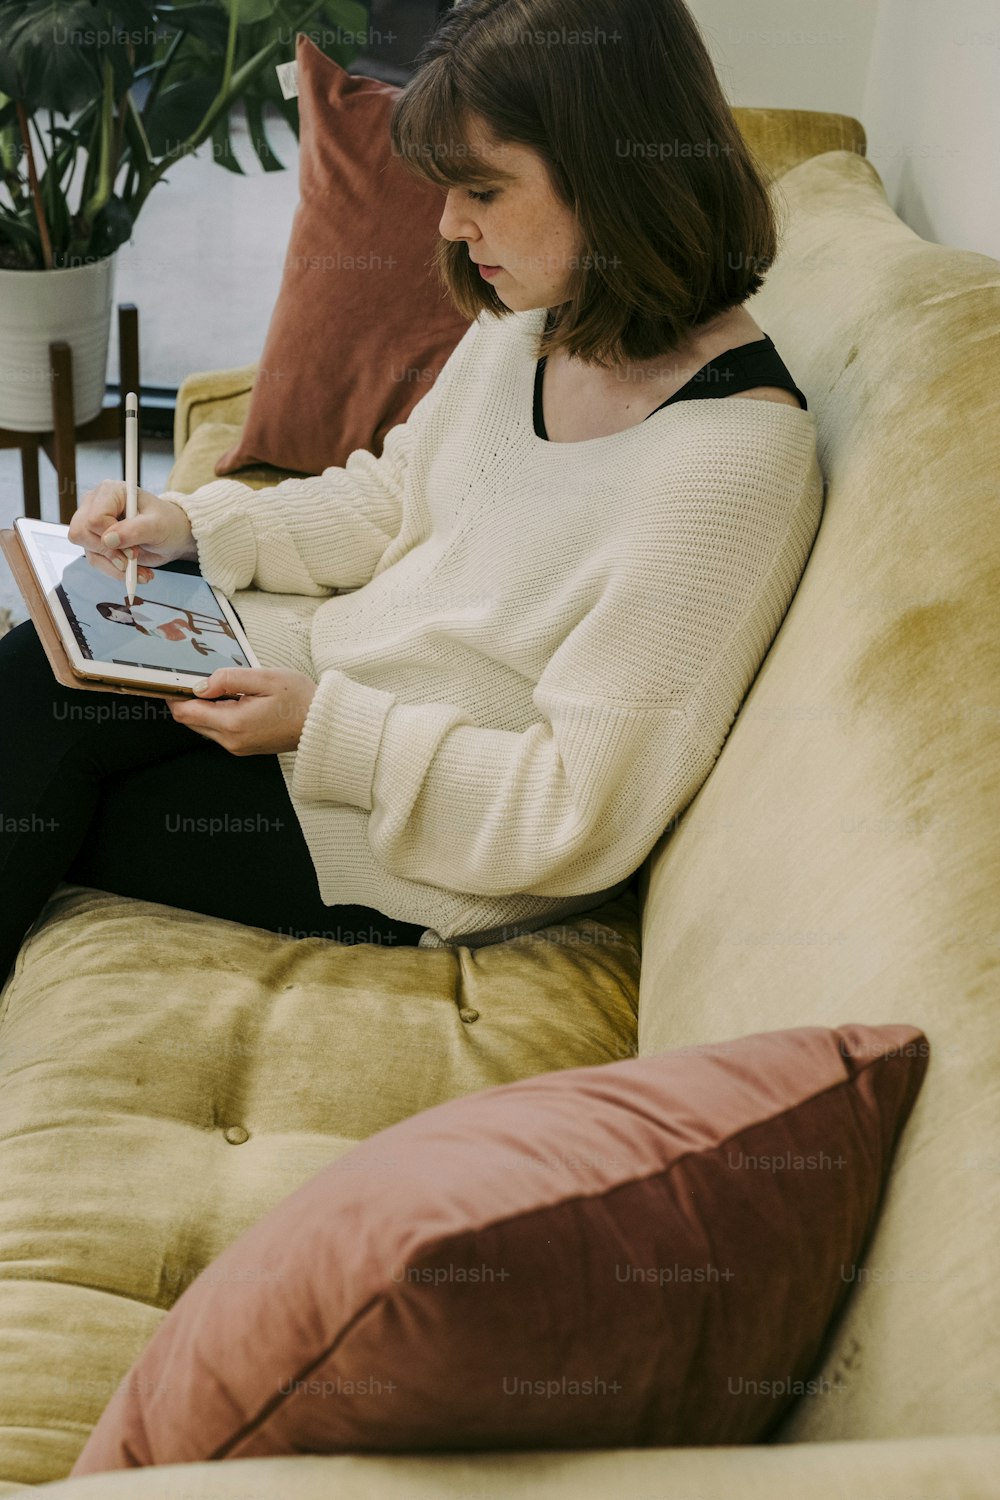 a woman sitting on a couch using a tablet